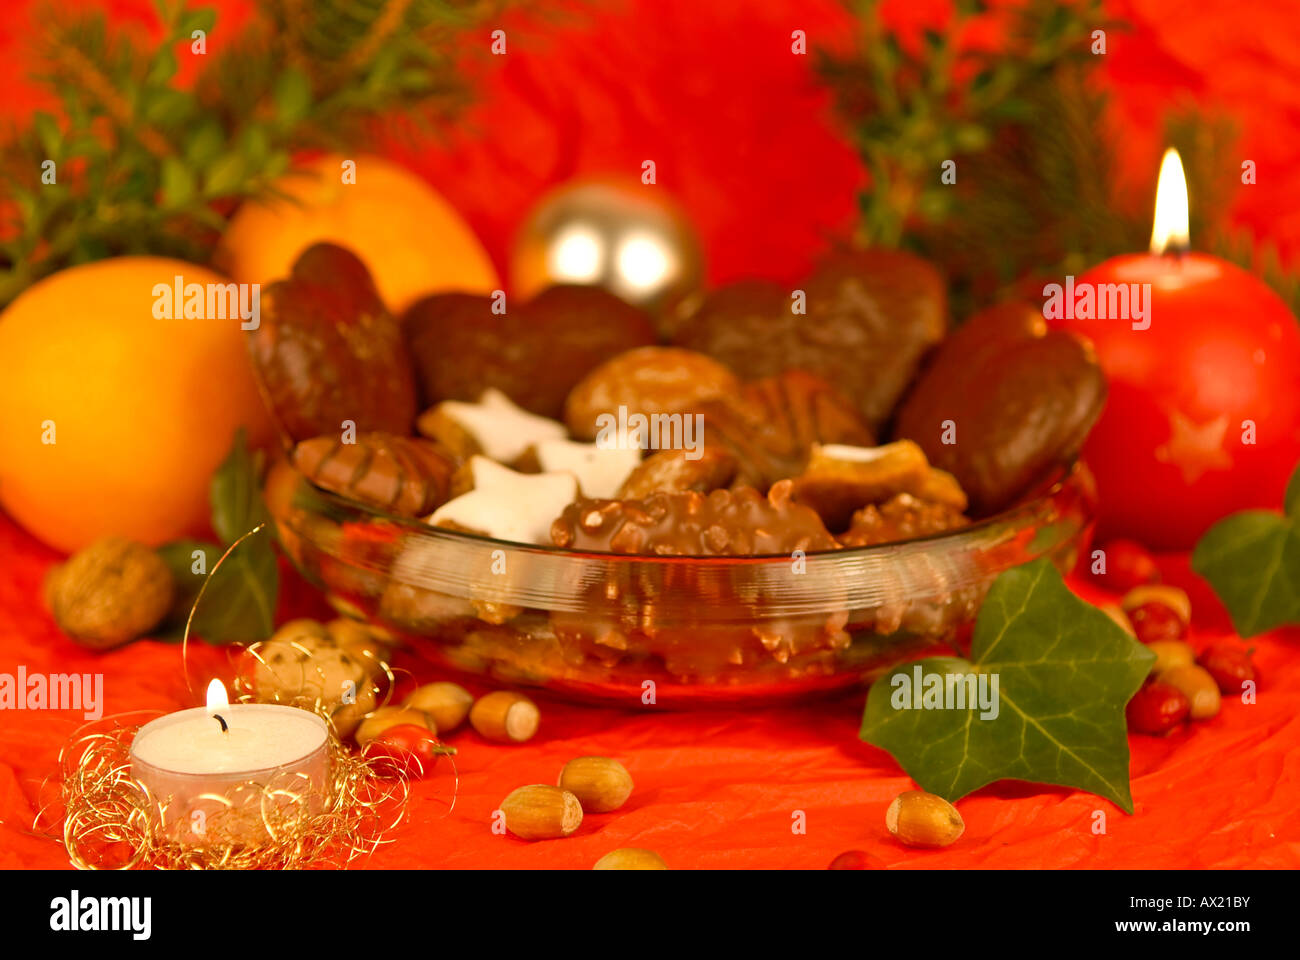 Christmas, candy in a bowl Stock Photo